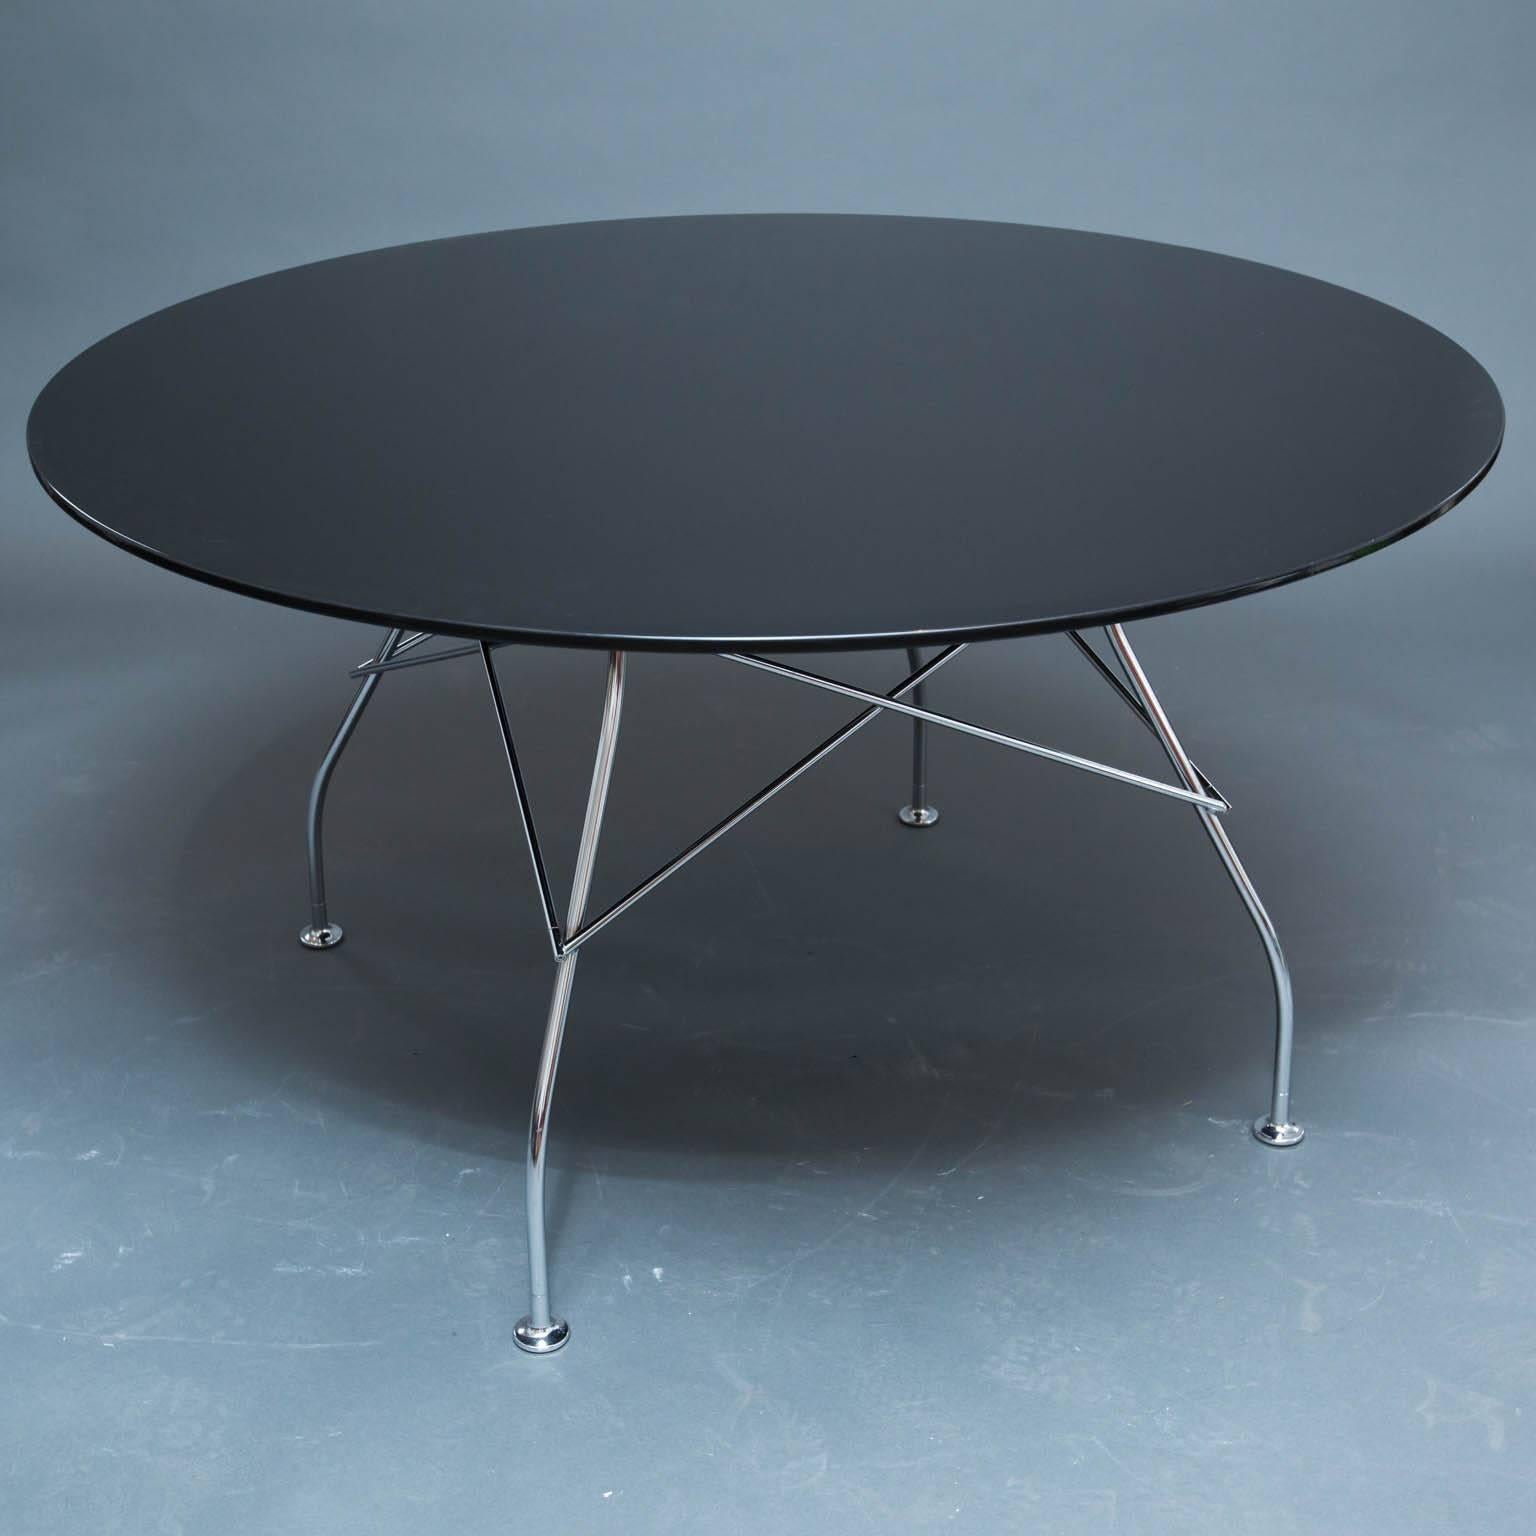 Nice modern table with chrome base and high-gloss lacquered top.